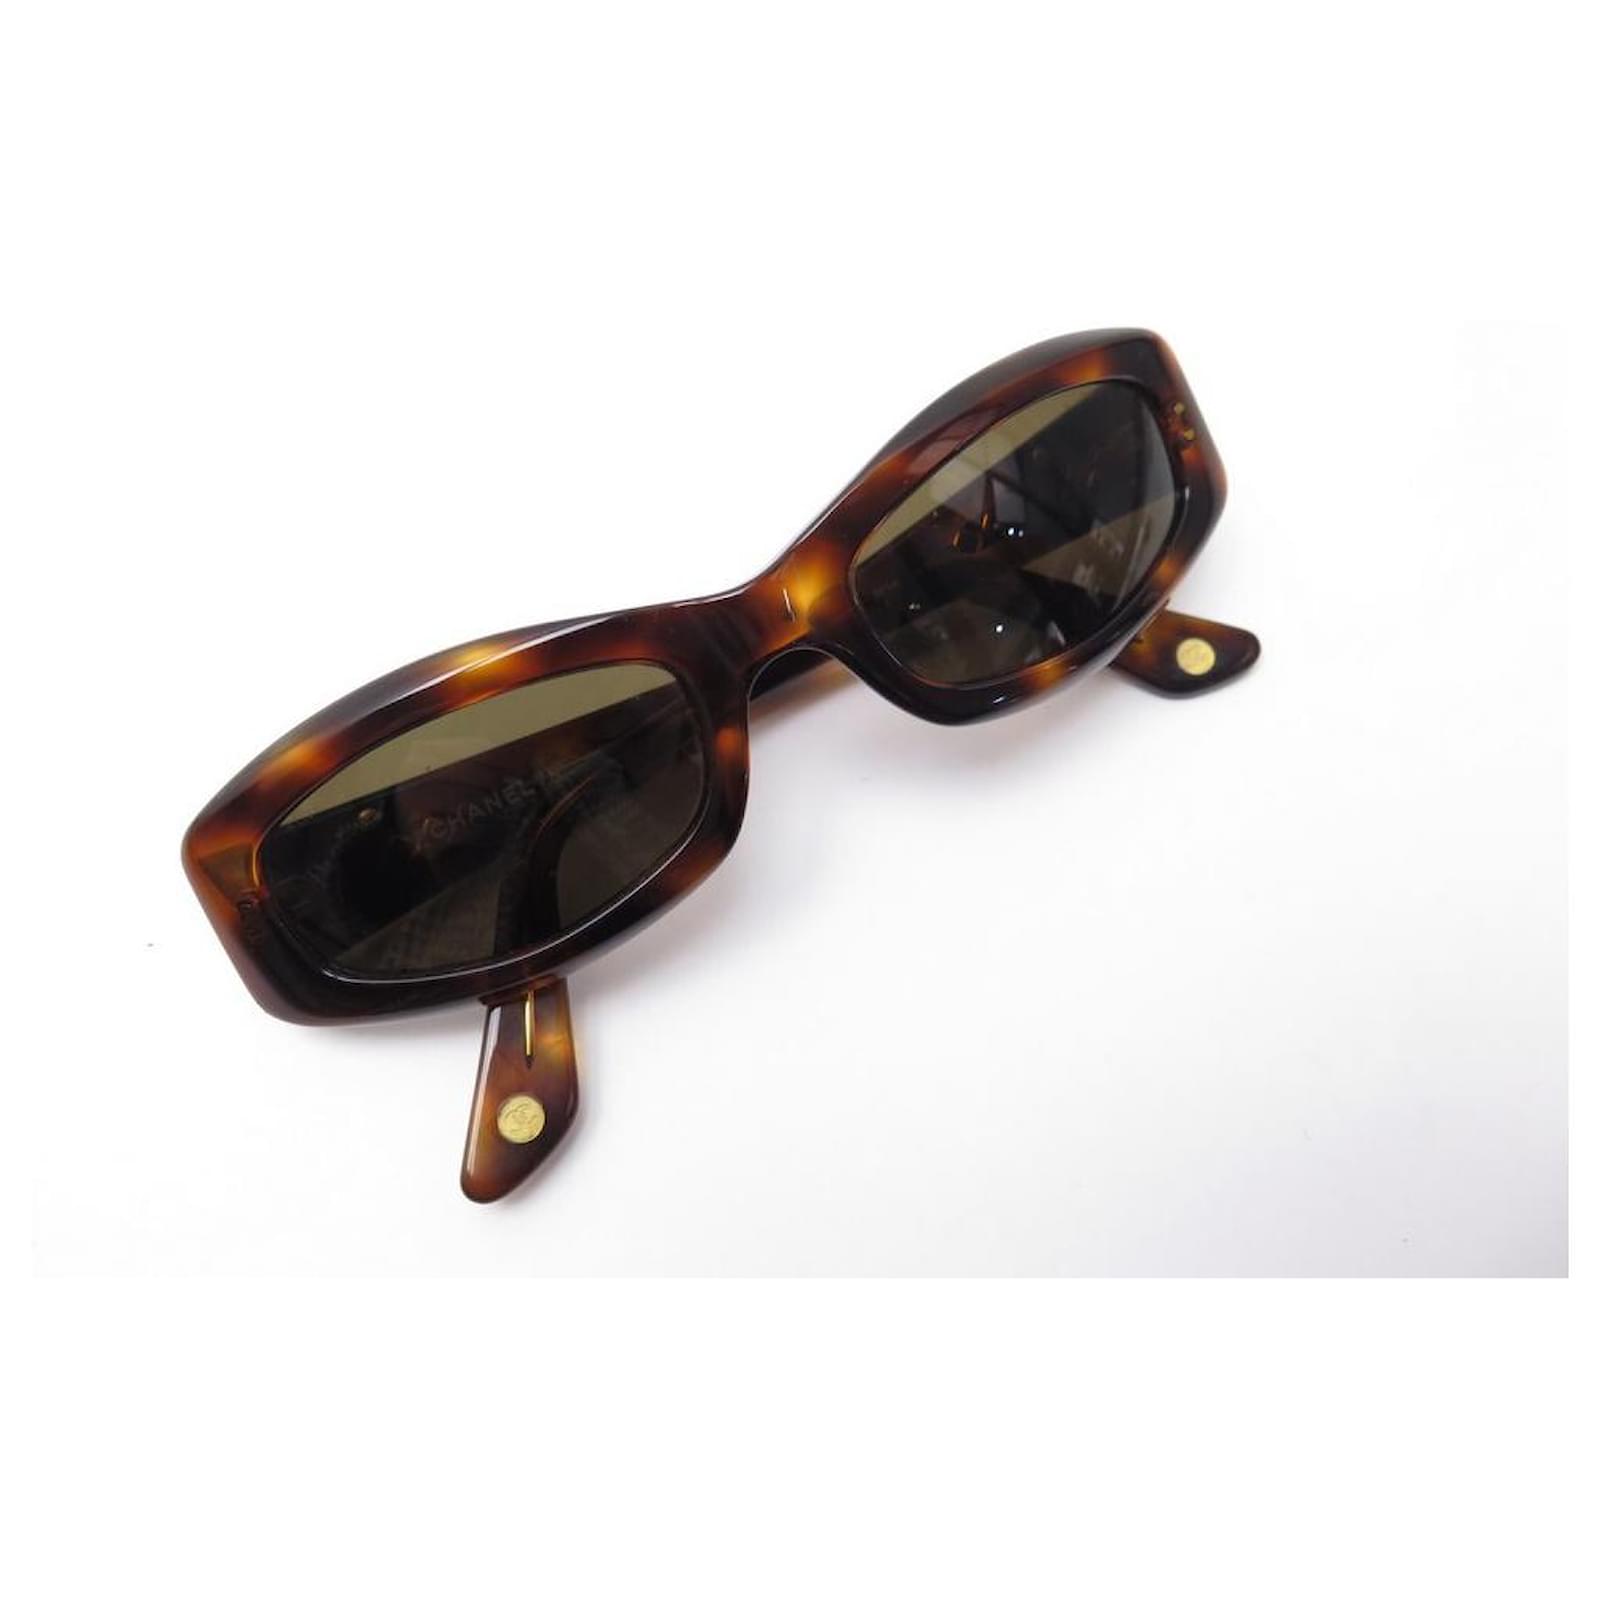 CHANEL 90s BROWN TORTOISE FRAME QUILTED SUNGLASSES